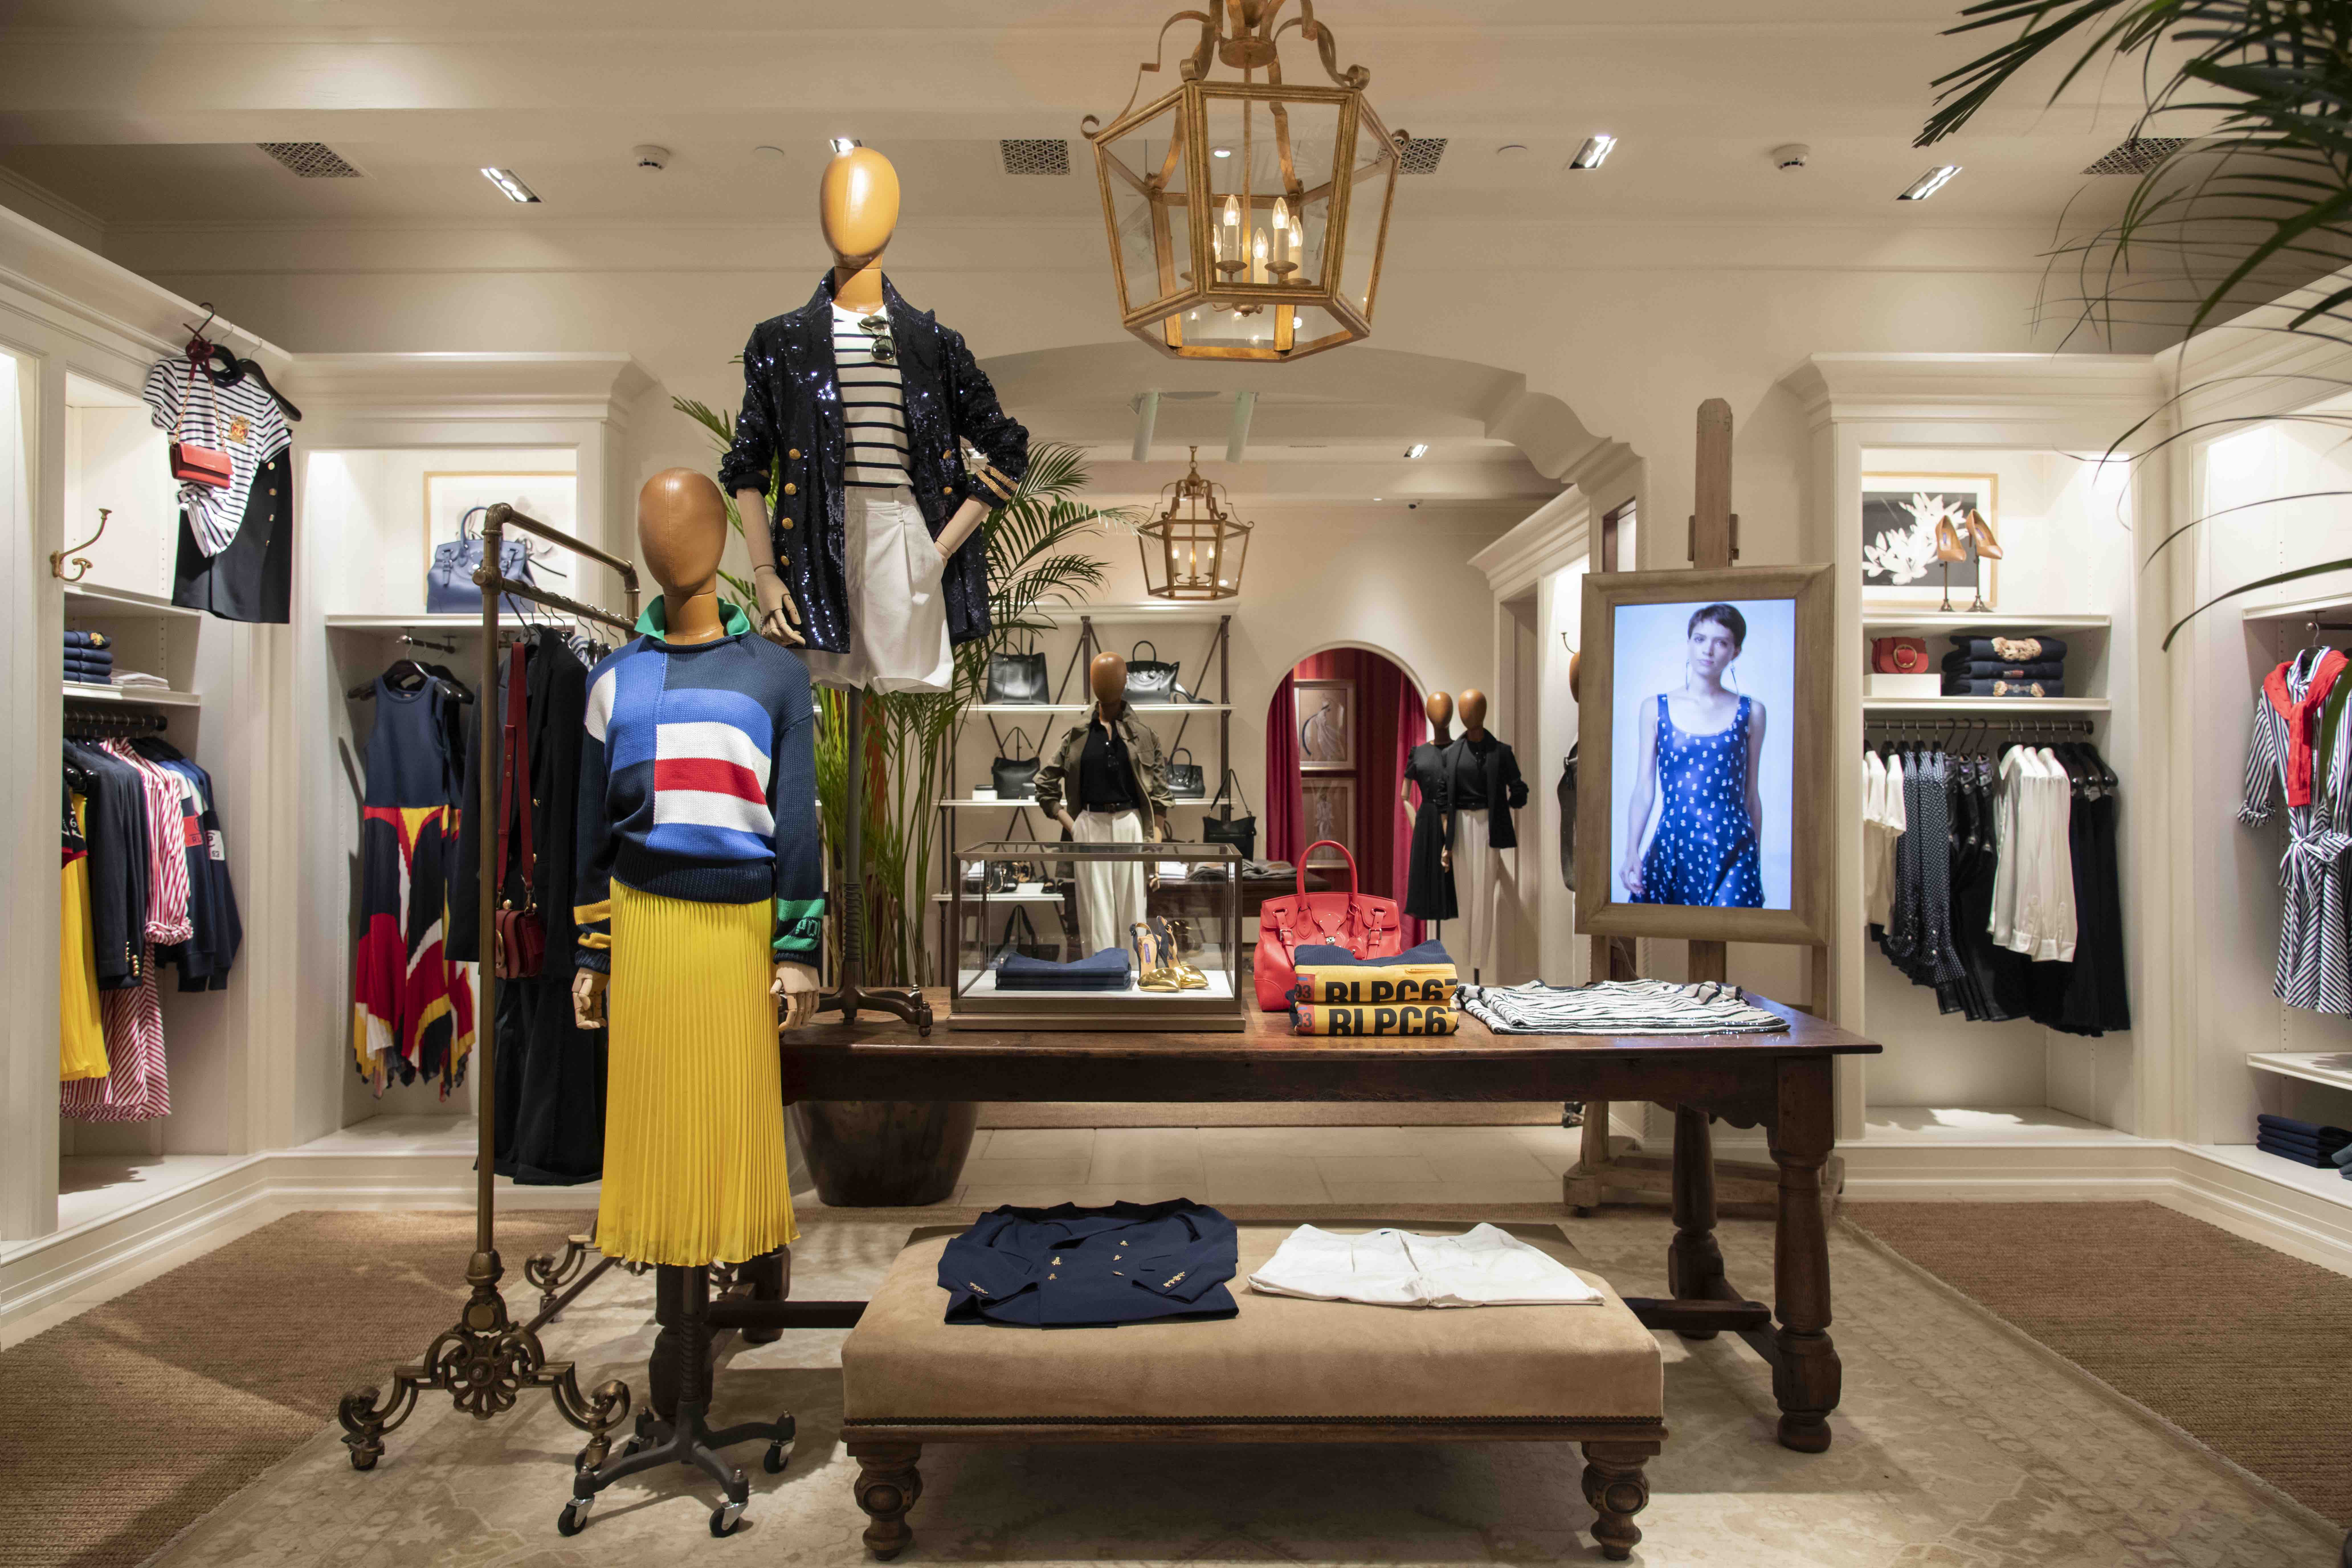 Ralph Lauren's new store launches in Delhi: Here's what you must grab